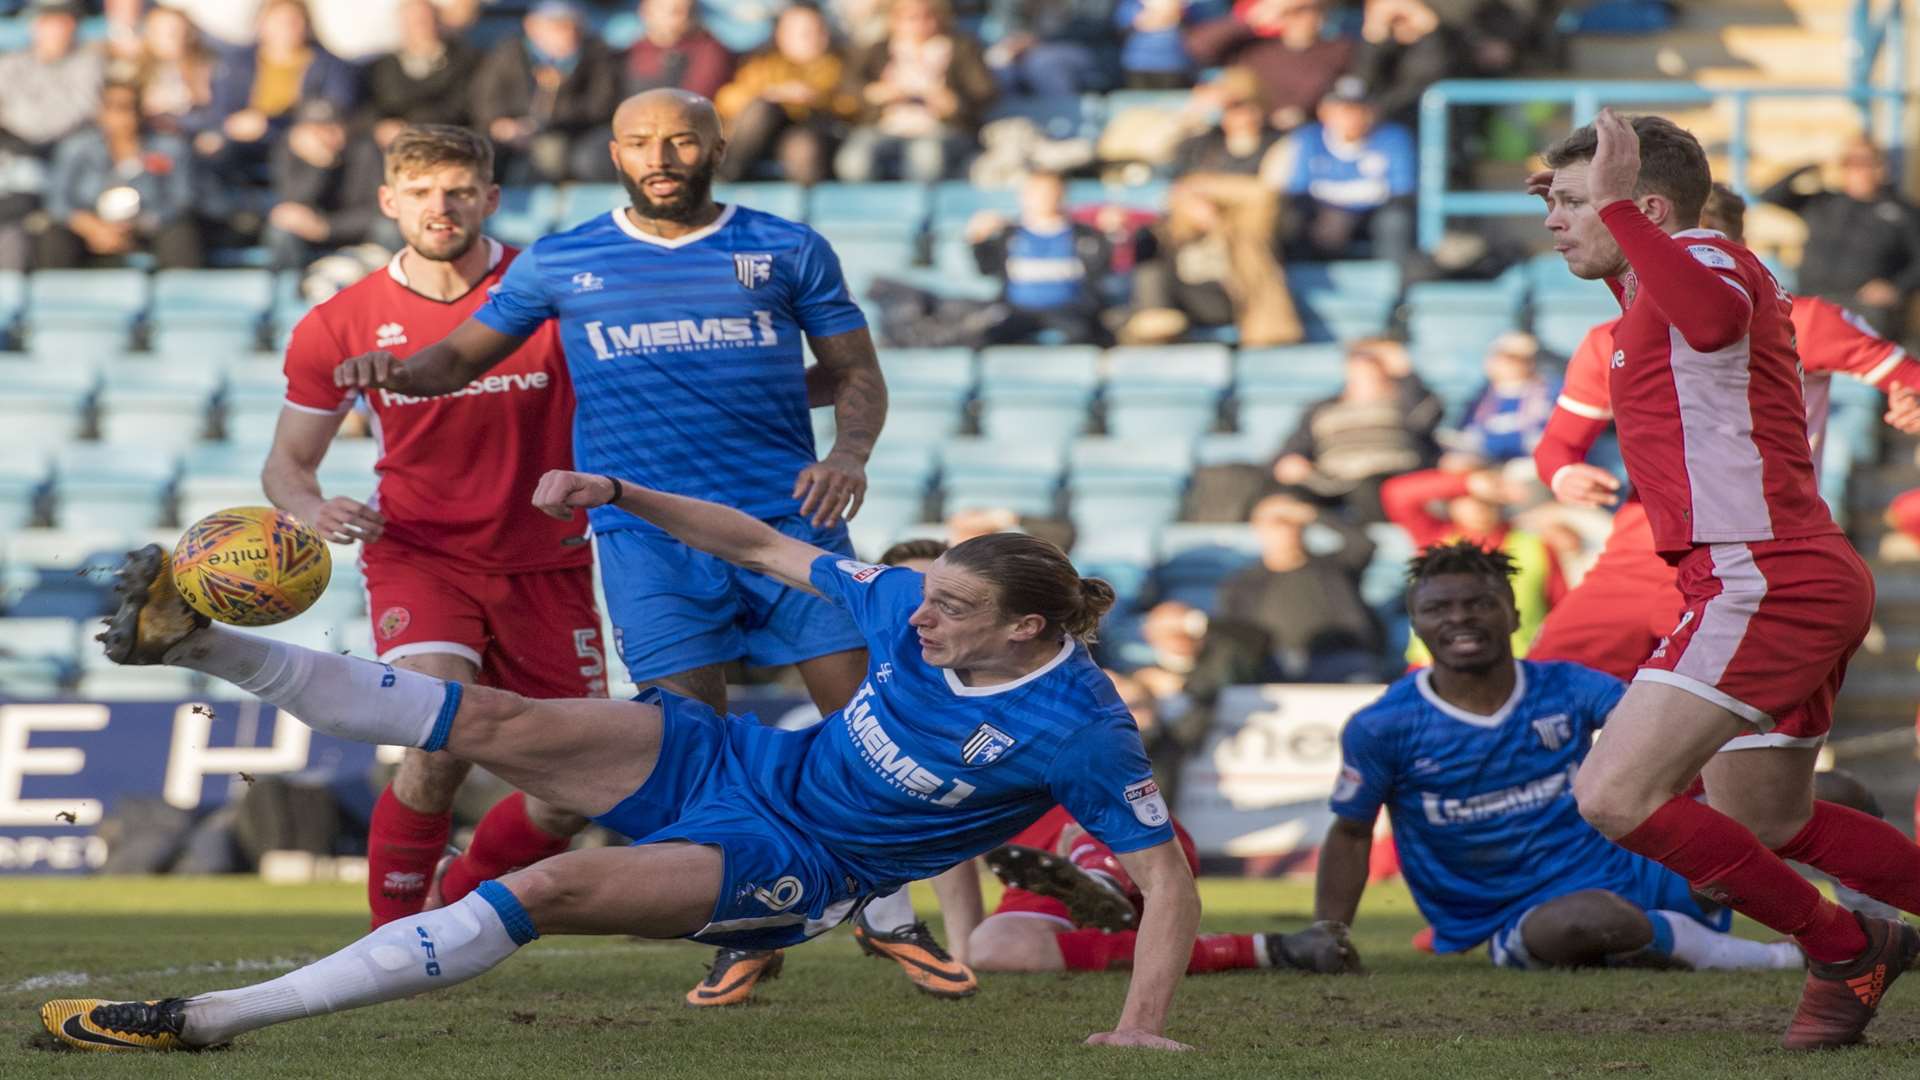 Tom Eaves tries to connect as Gills go on the attack Picture: Andy Payton